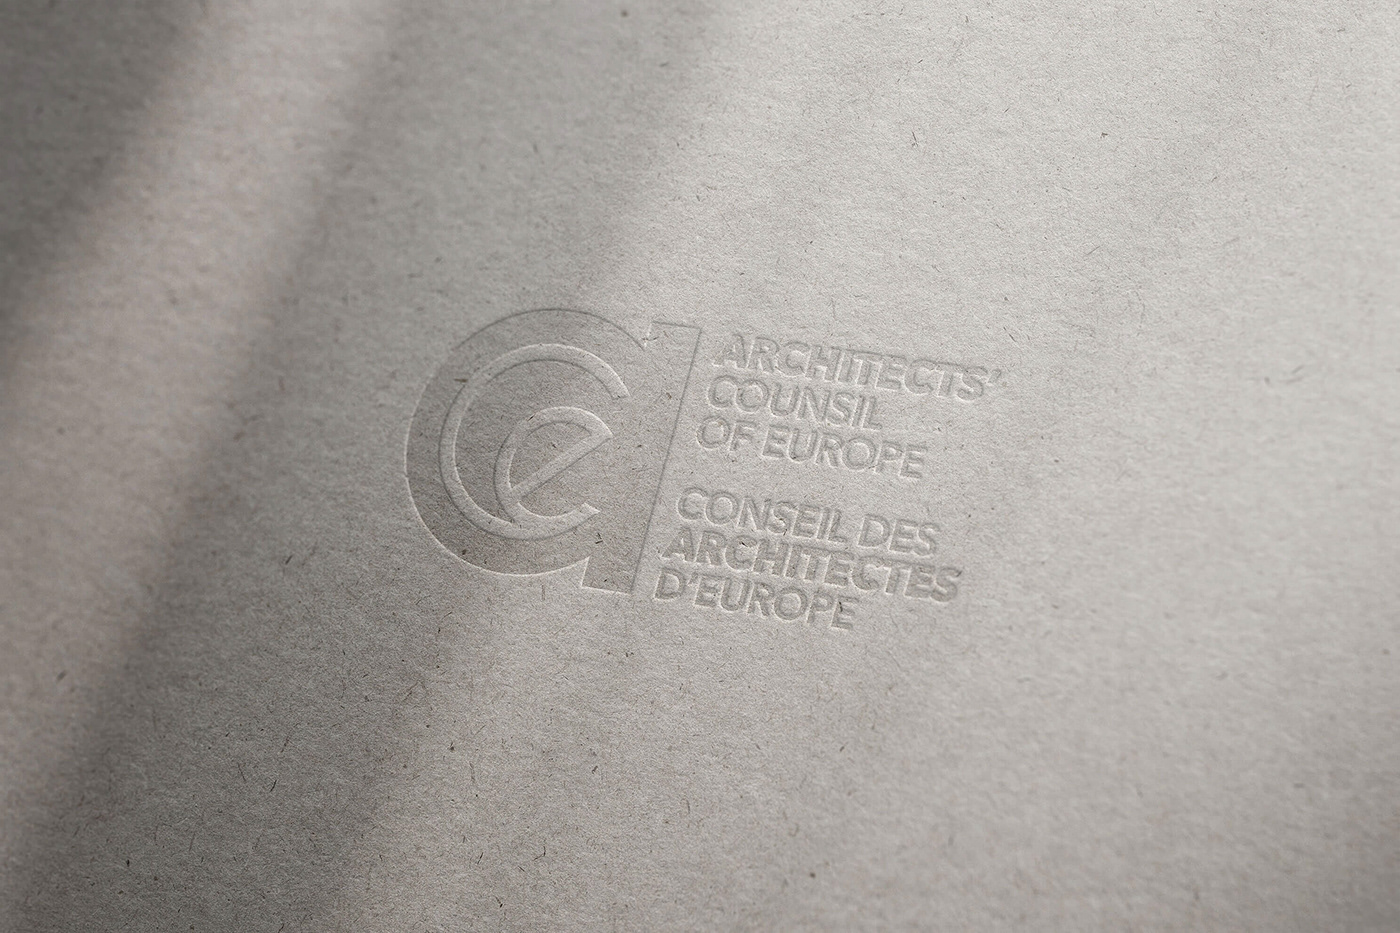 ace architects council Architectural Elements Creativity Europe Logo Design Practicability visual identity 2021